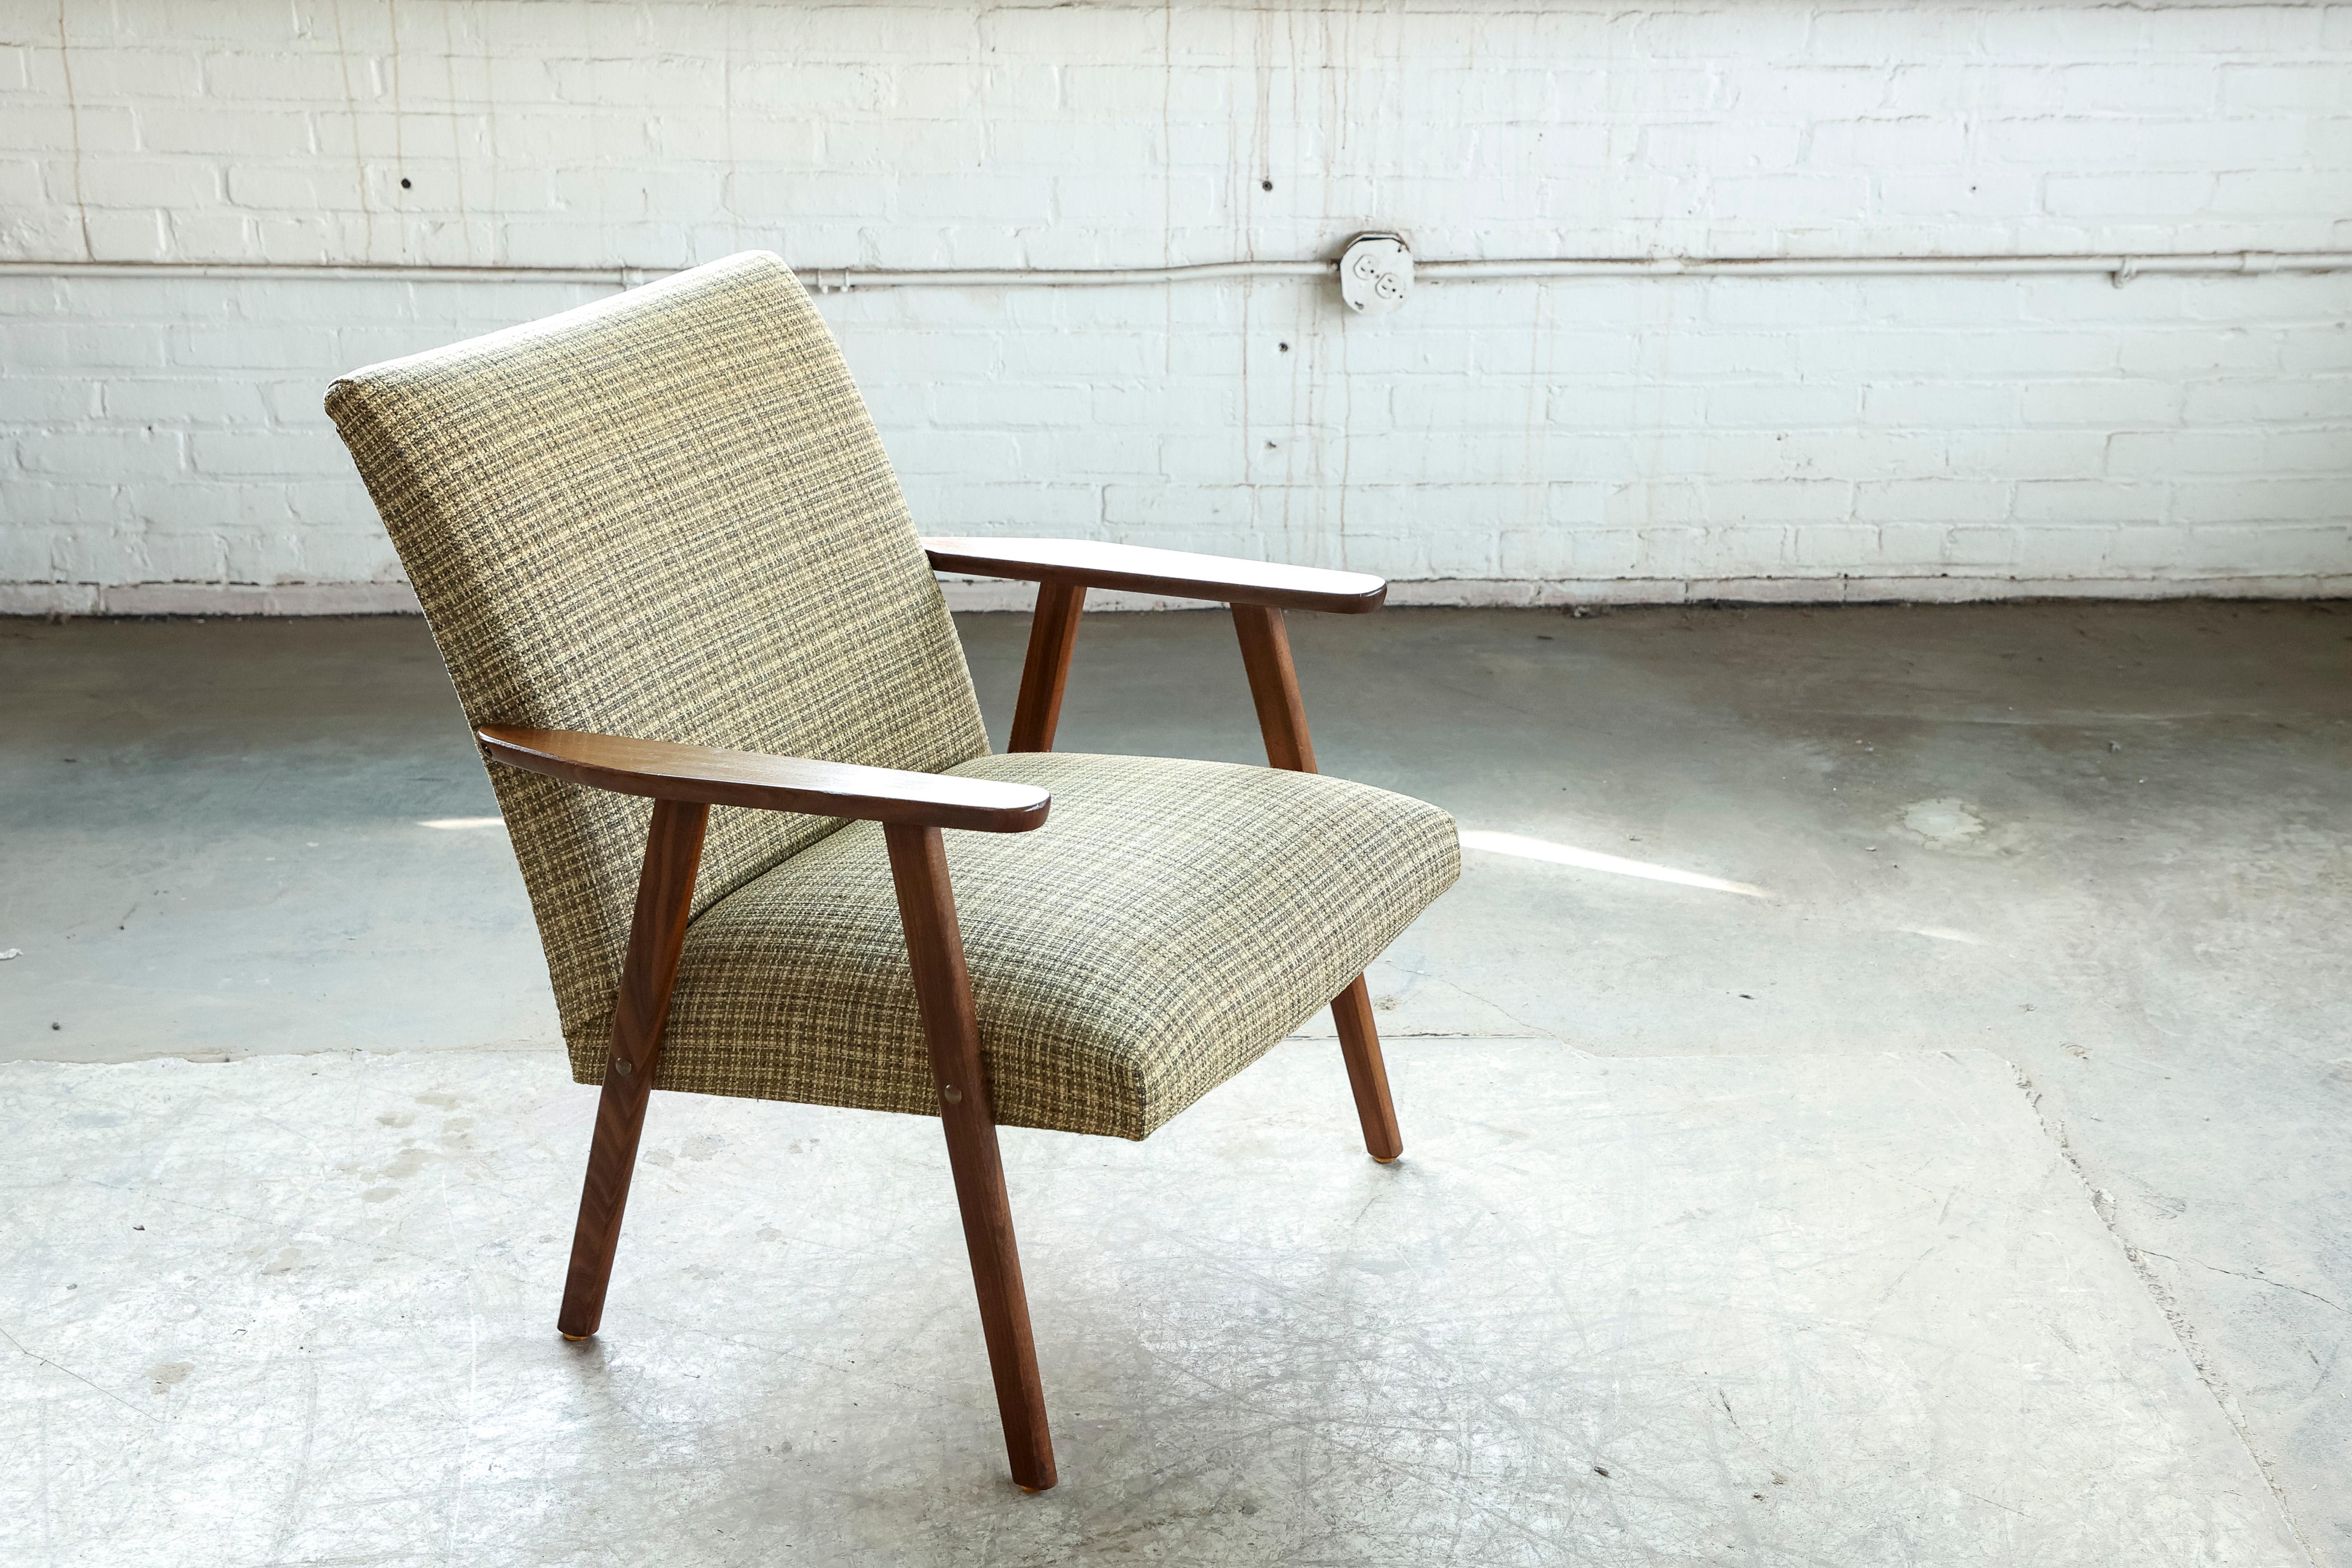 Really nice 1960s easy chair very typical for the designs of the era such as Arne Vodder and Hans Wegner. Frame is built into the seat and made from solid teak. solid and sturdy yet light versatile chair and overall in very good condition with the